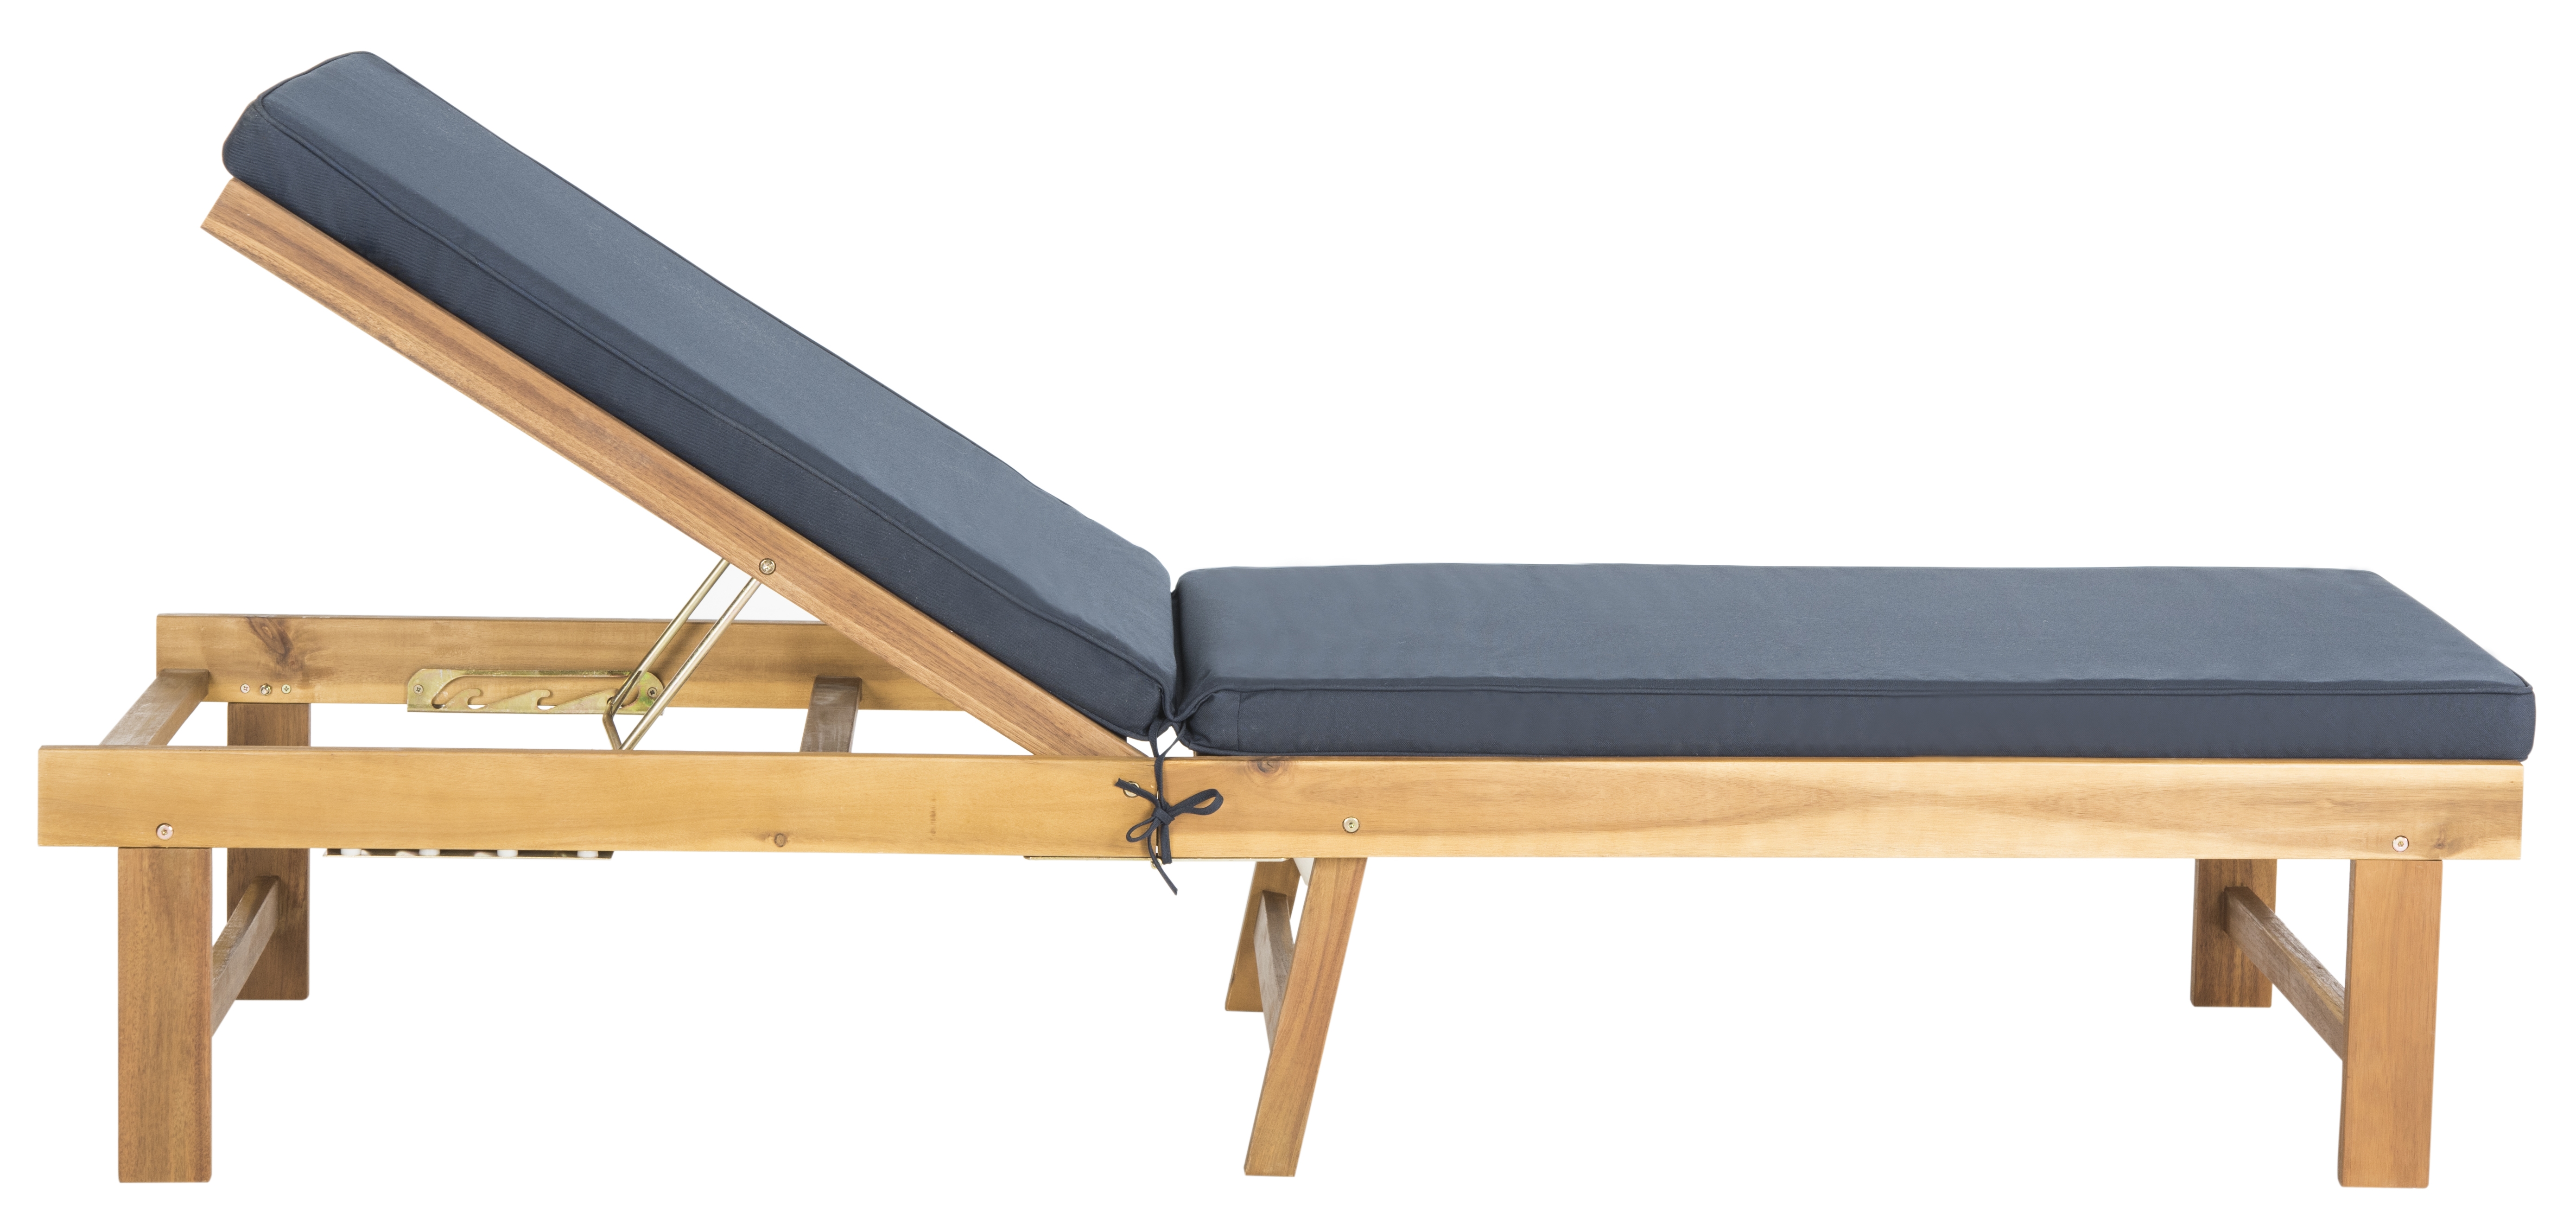 Inglewood Chaise Lounge Chair - Natural/Navy - Safavieh - Image 1